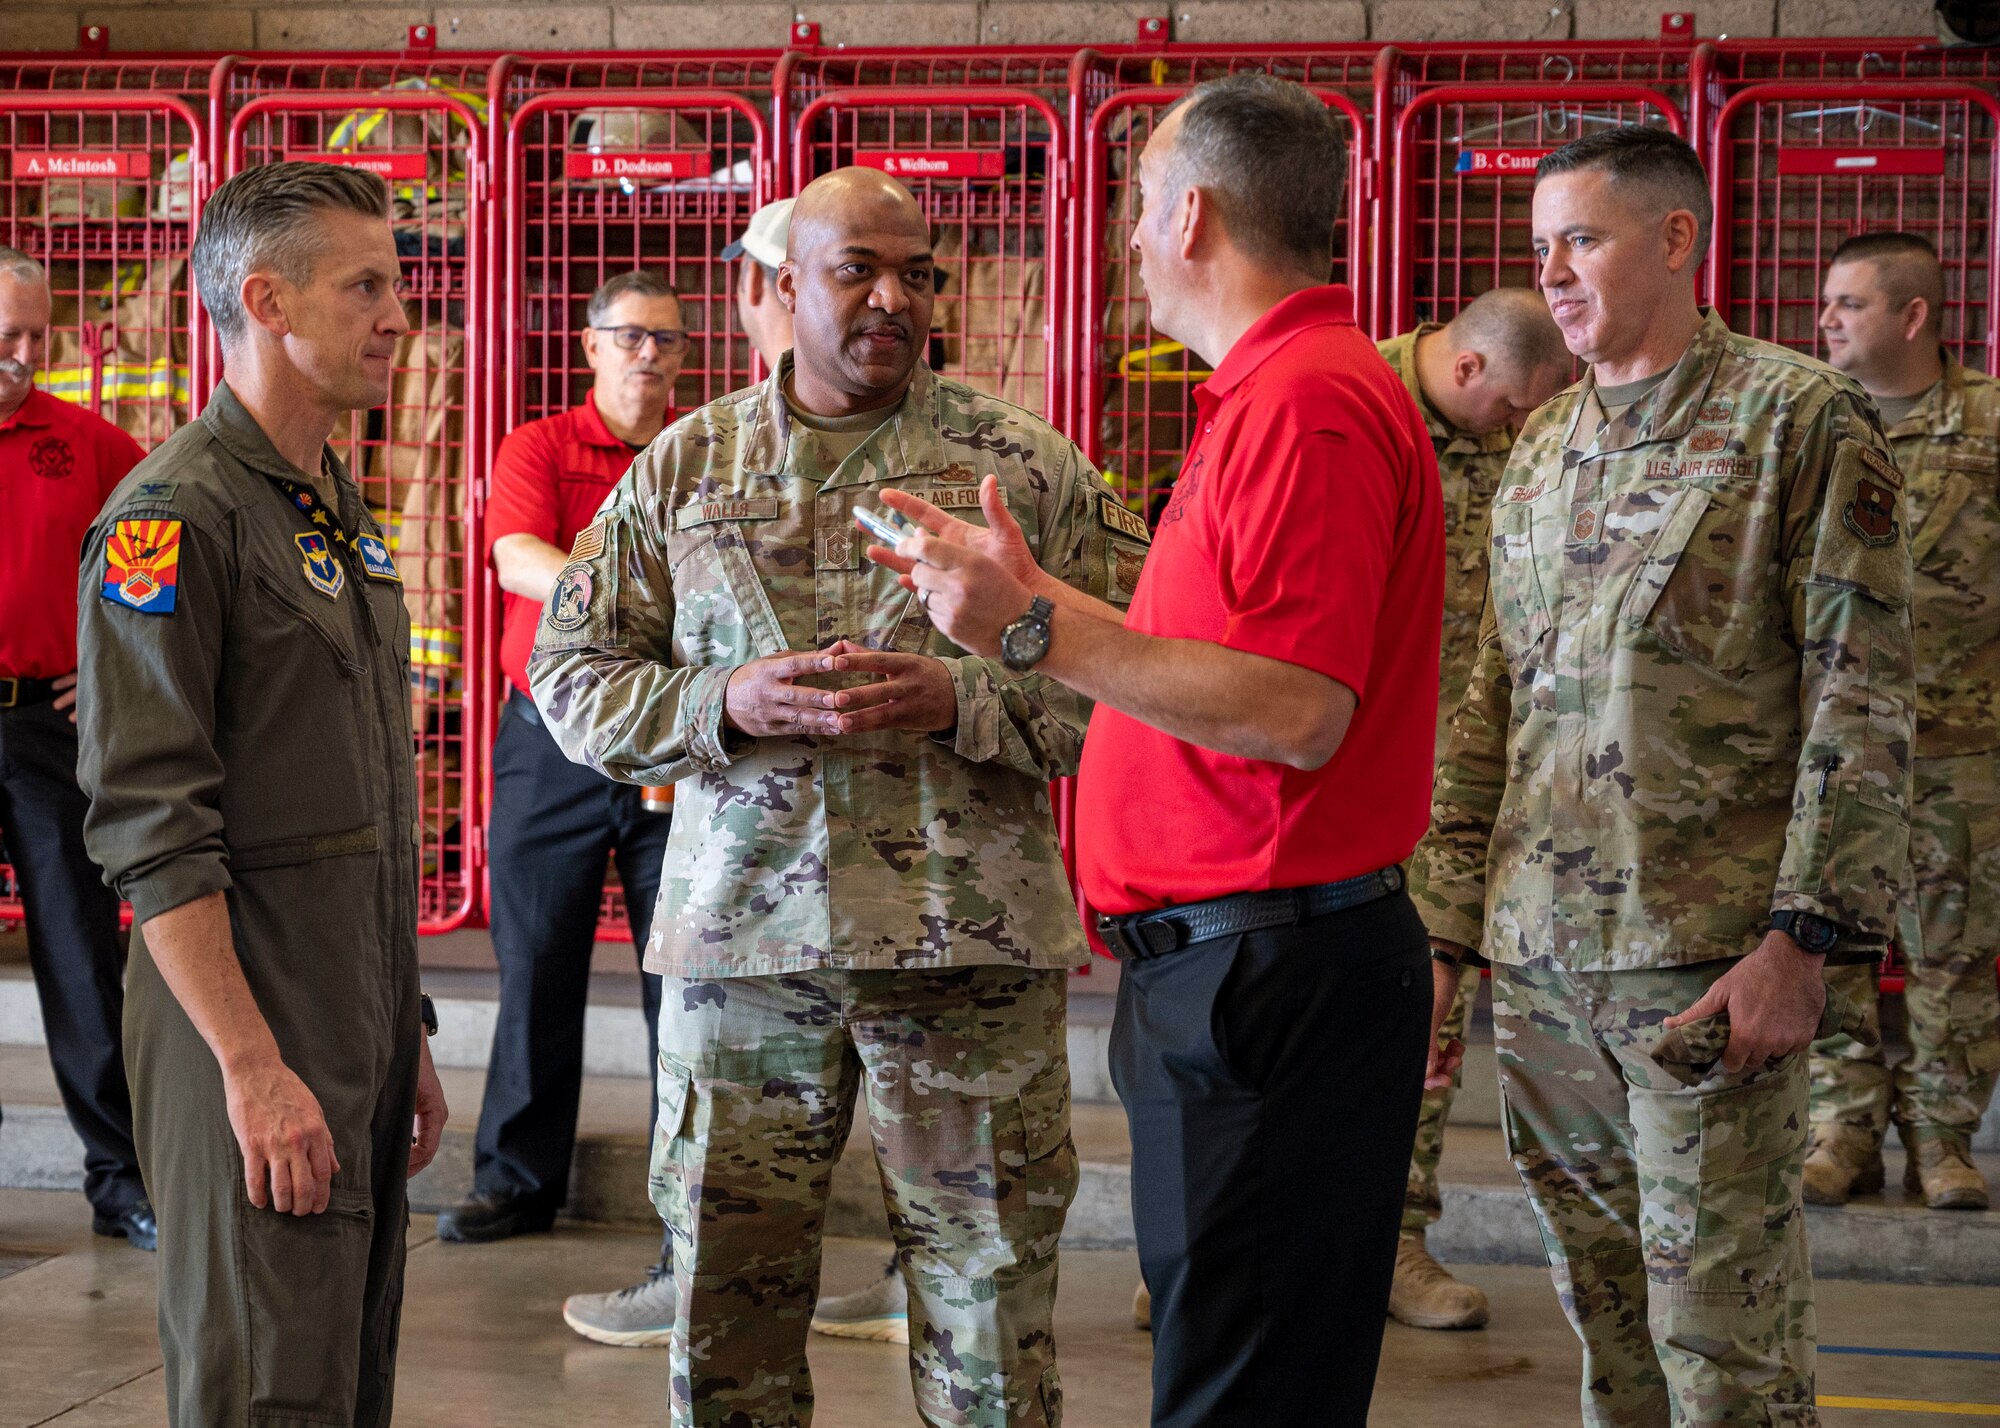 U.S. Air Force Col. Keagan McLeese, 56th Fighter Wing vice wing commander (far left), CMSgt. Darnell Walls, 56th Civil Engineer Squadron fire chief (center left), and CMSgt. Jason Shaffer, 56th FW command chief (far right), listen to Jason Haddock, 56th CES assistant fire chief (center right), at the start of Fire Prevention Week Oct. 7, 2022, at Luke Air Force Base, Arizona.